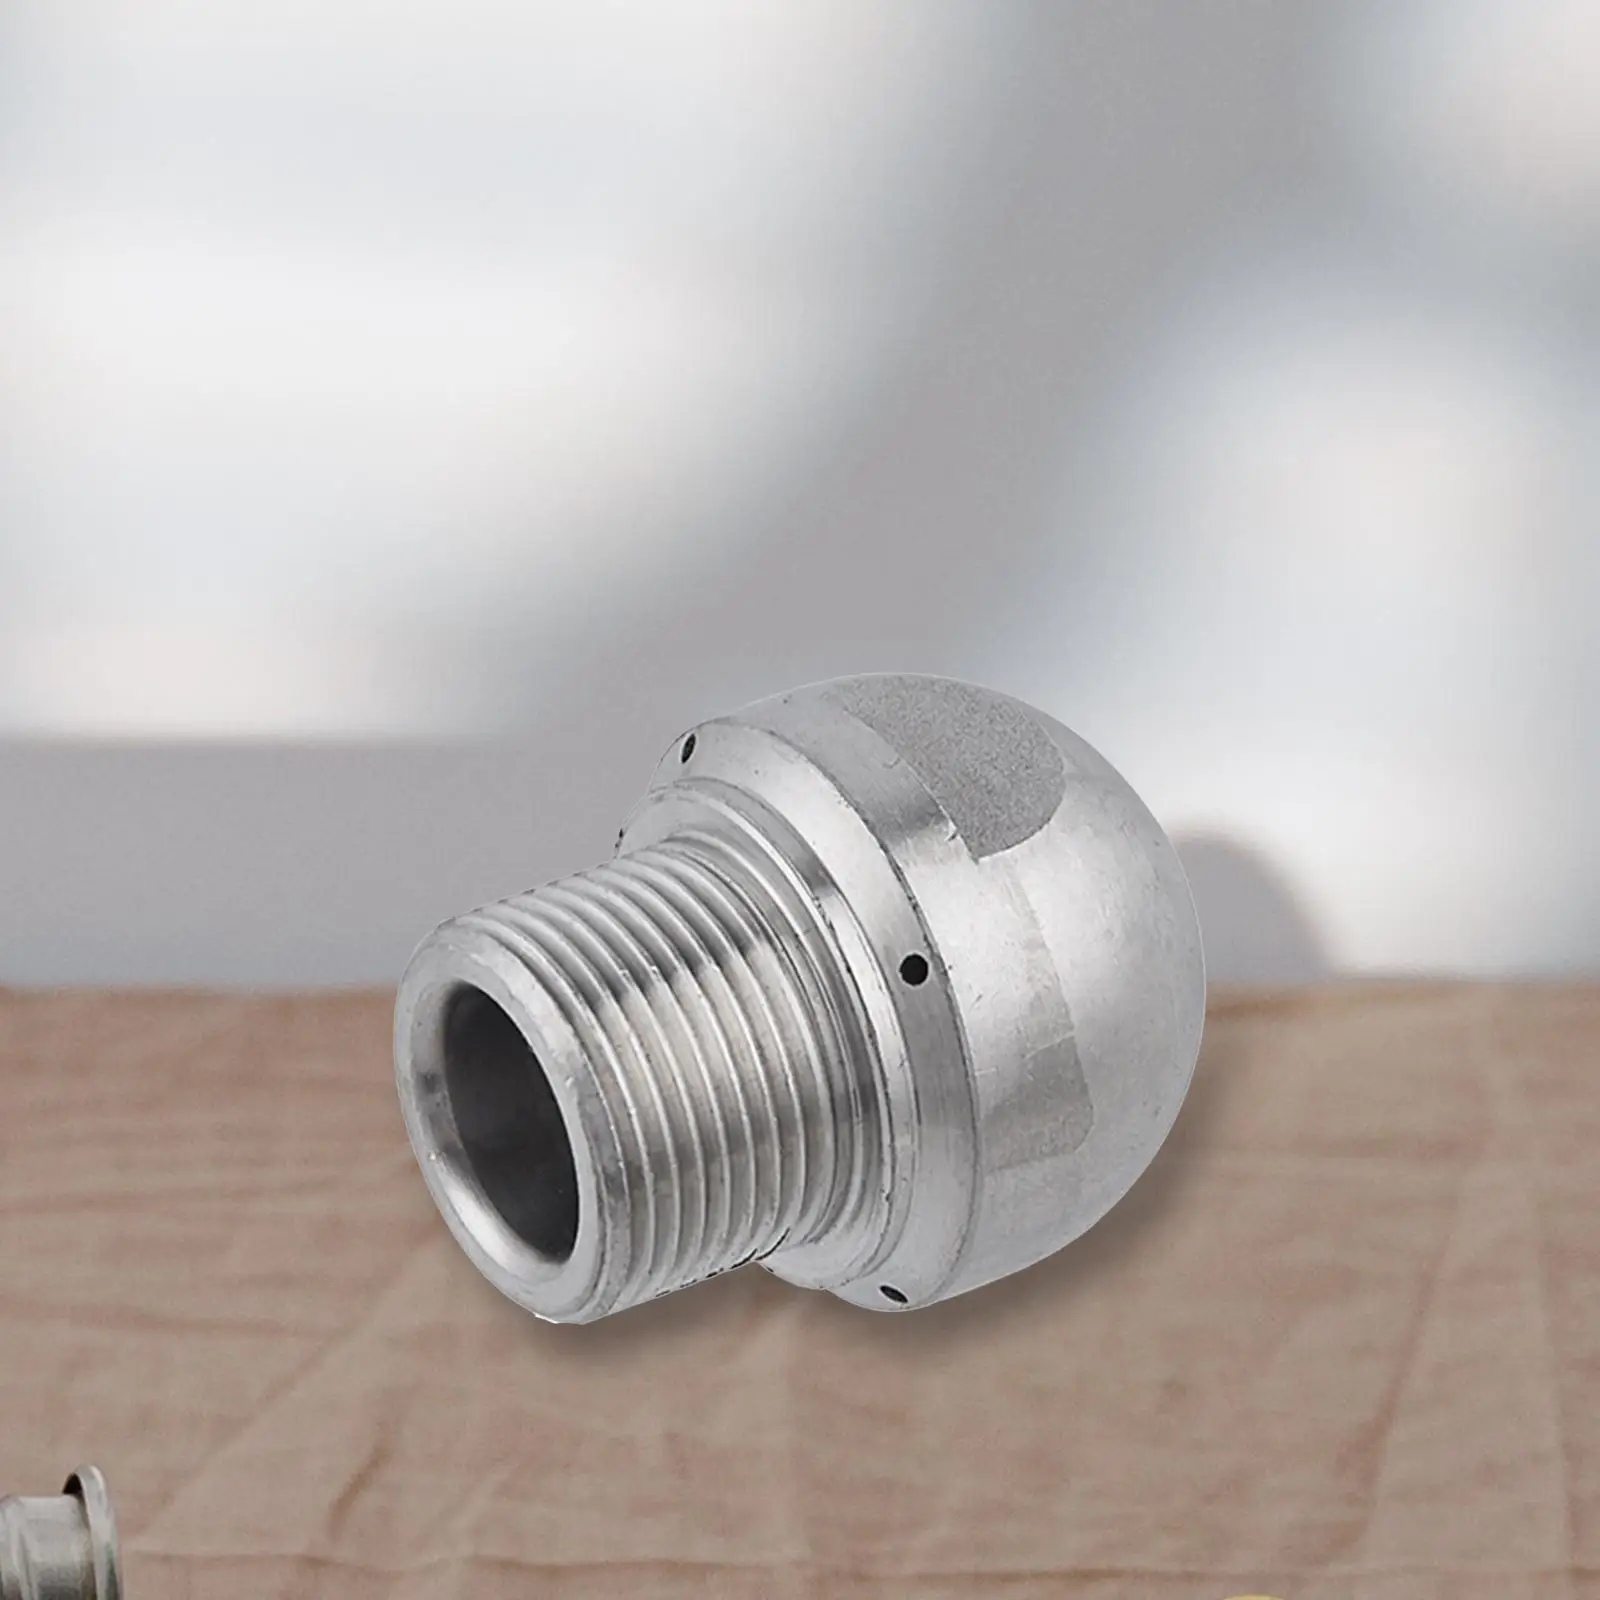 Drain Cleaning Nozzle Pressure Washer Quick Connector 1/4`` Quick Connect for Drain Jetting Hose High Pressure Washer Accessory